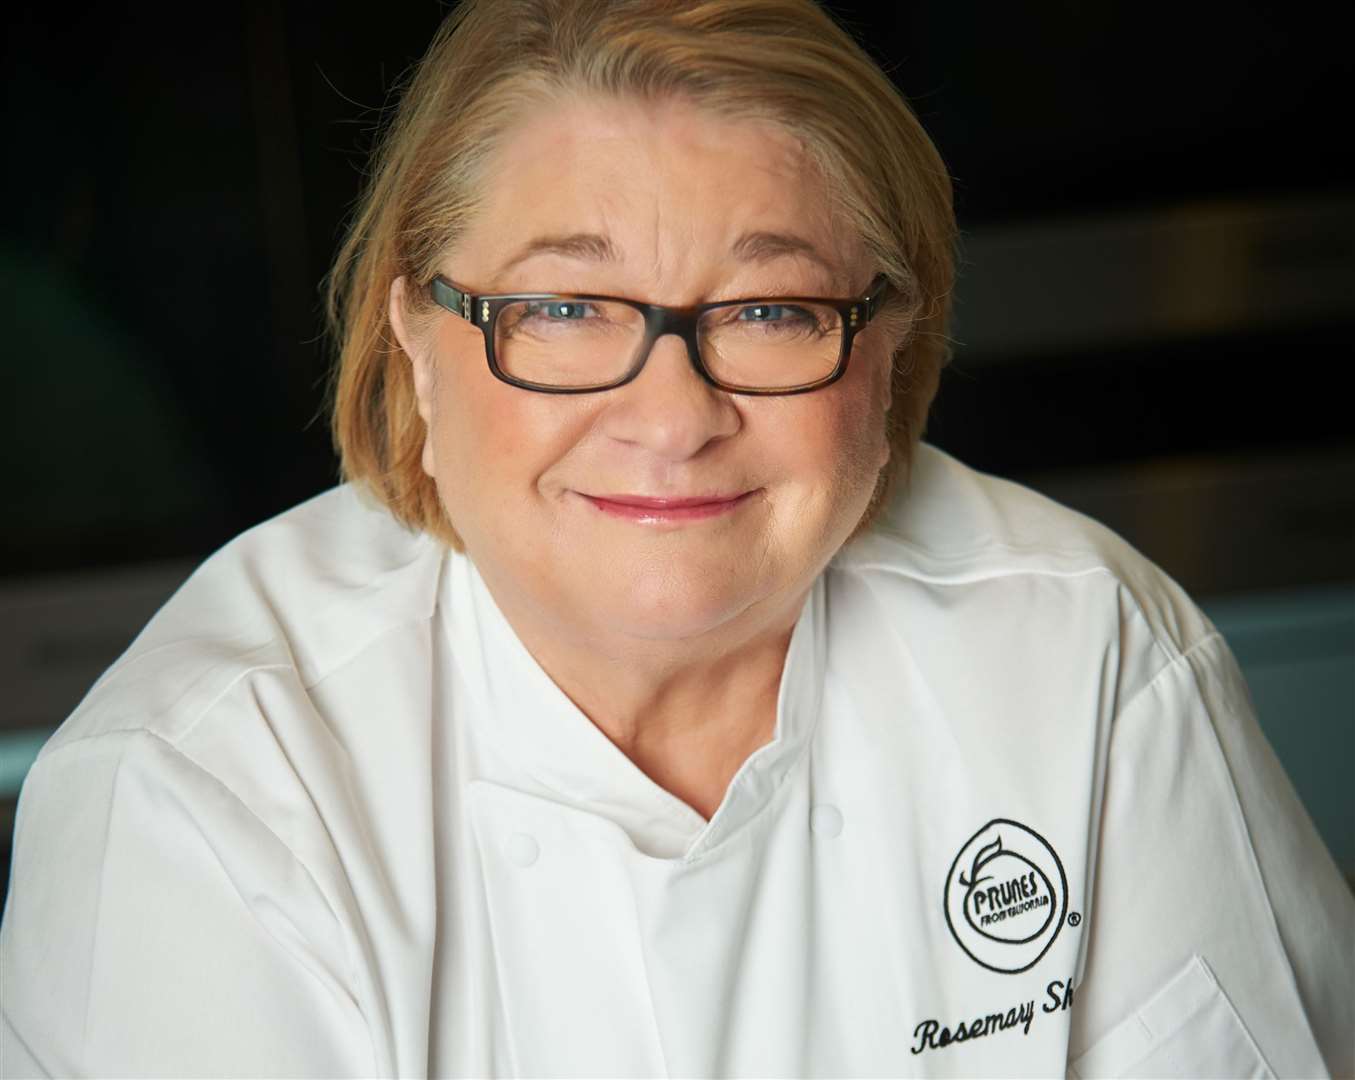 Tunbridge Wells' Rosemary Shrager is among the celebrity chef line-up